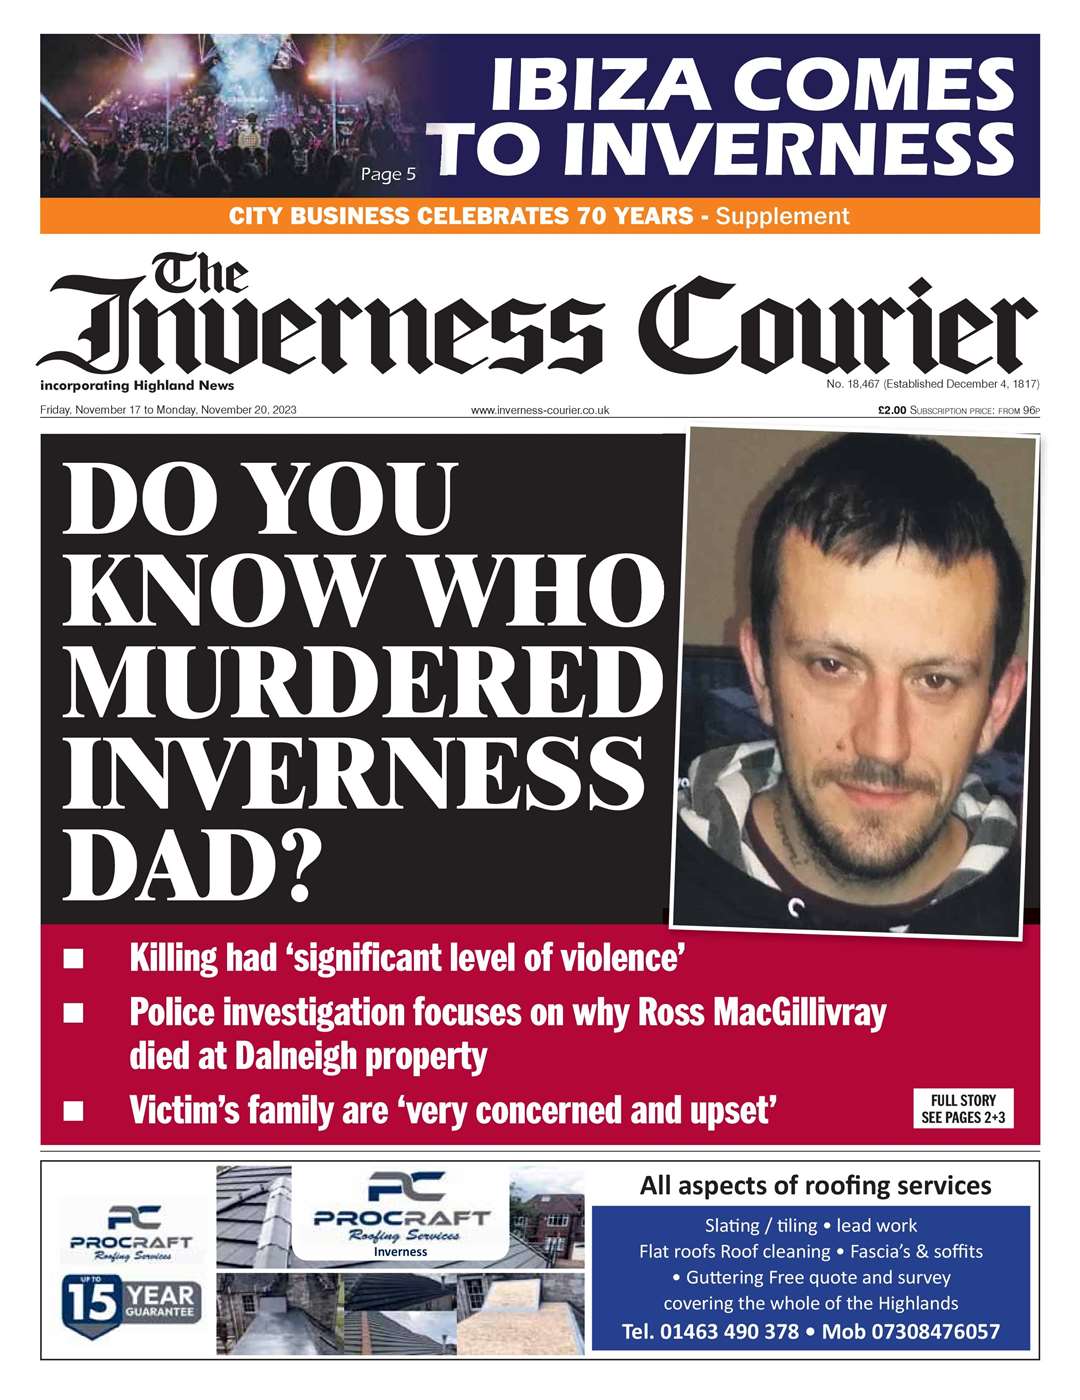 The Inverness Courier, November 17, front page.